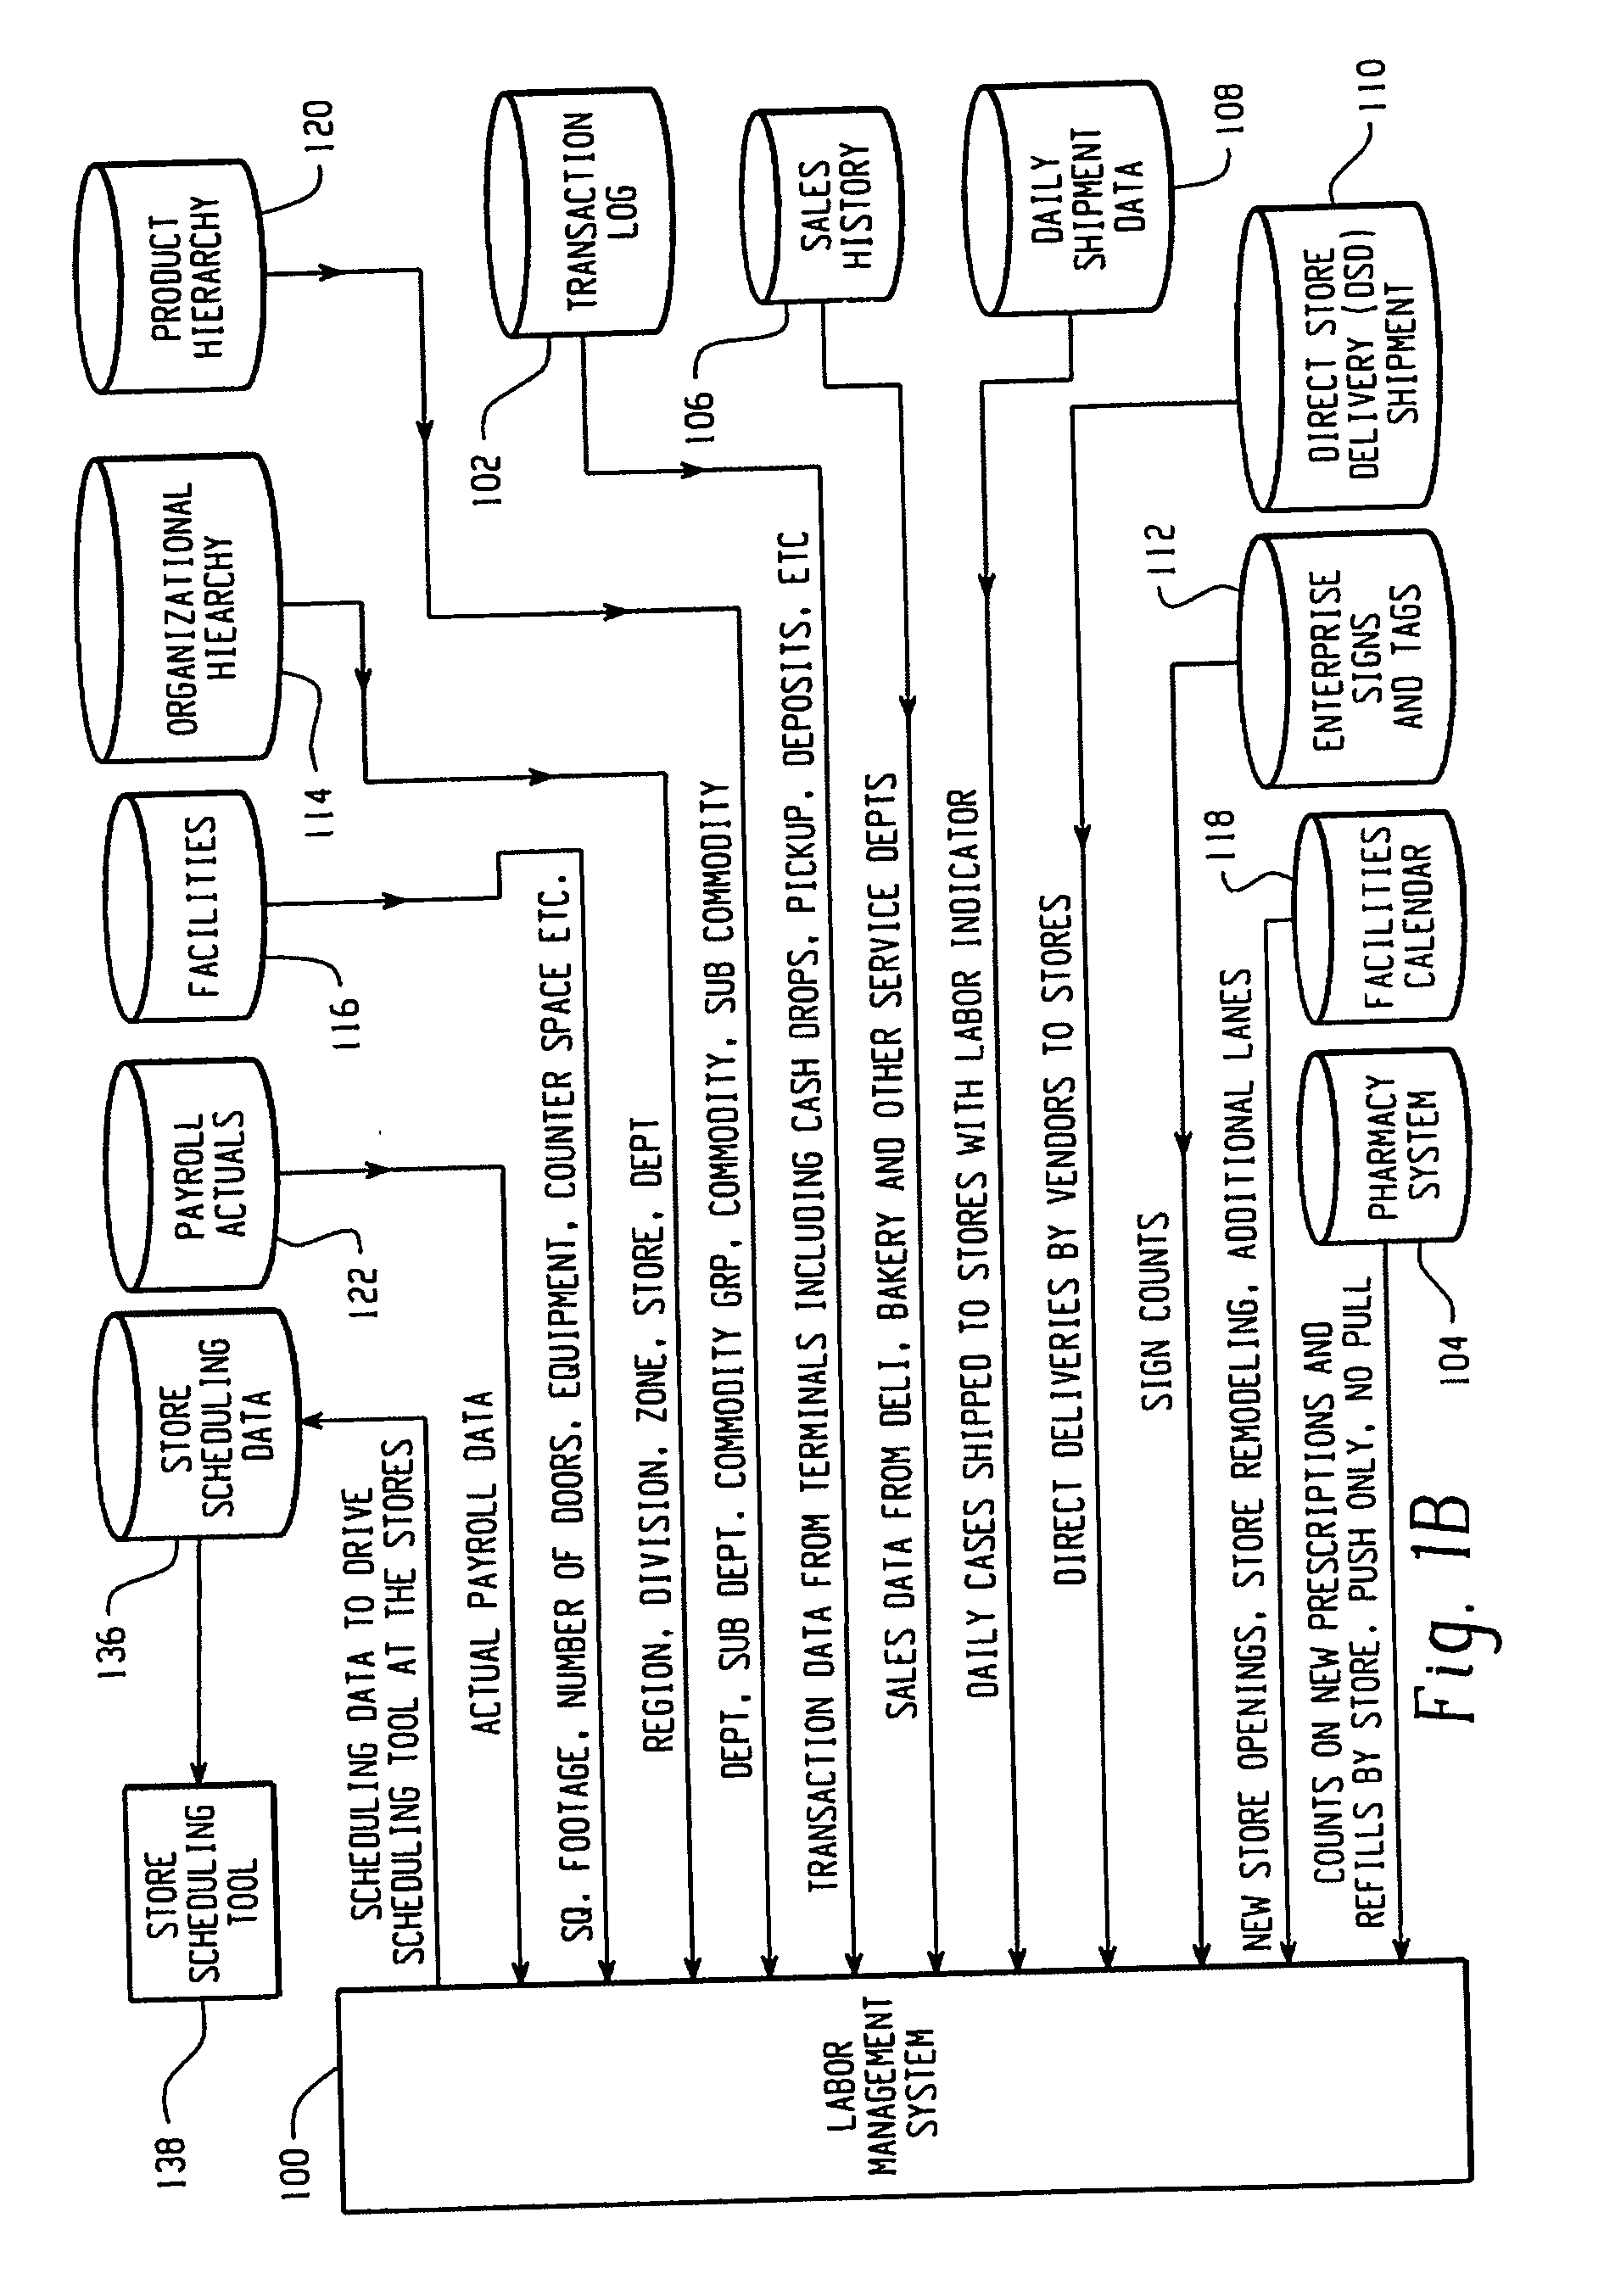 Labor and transaction management system and method